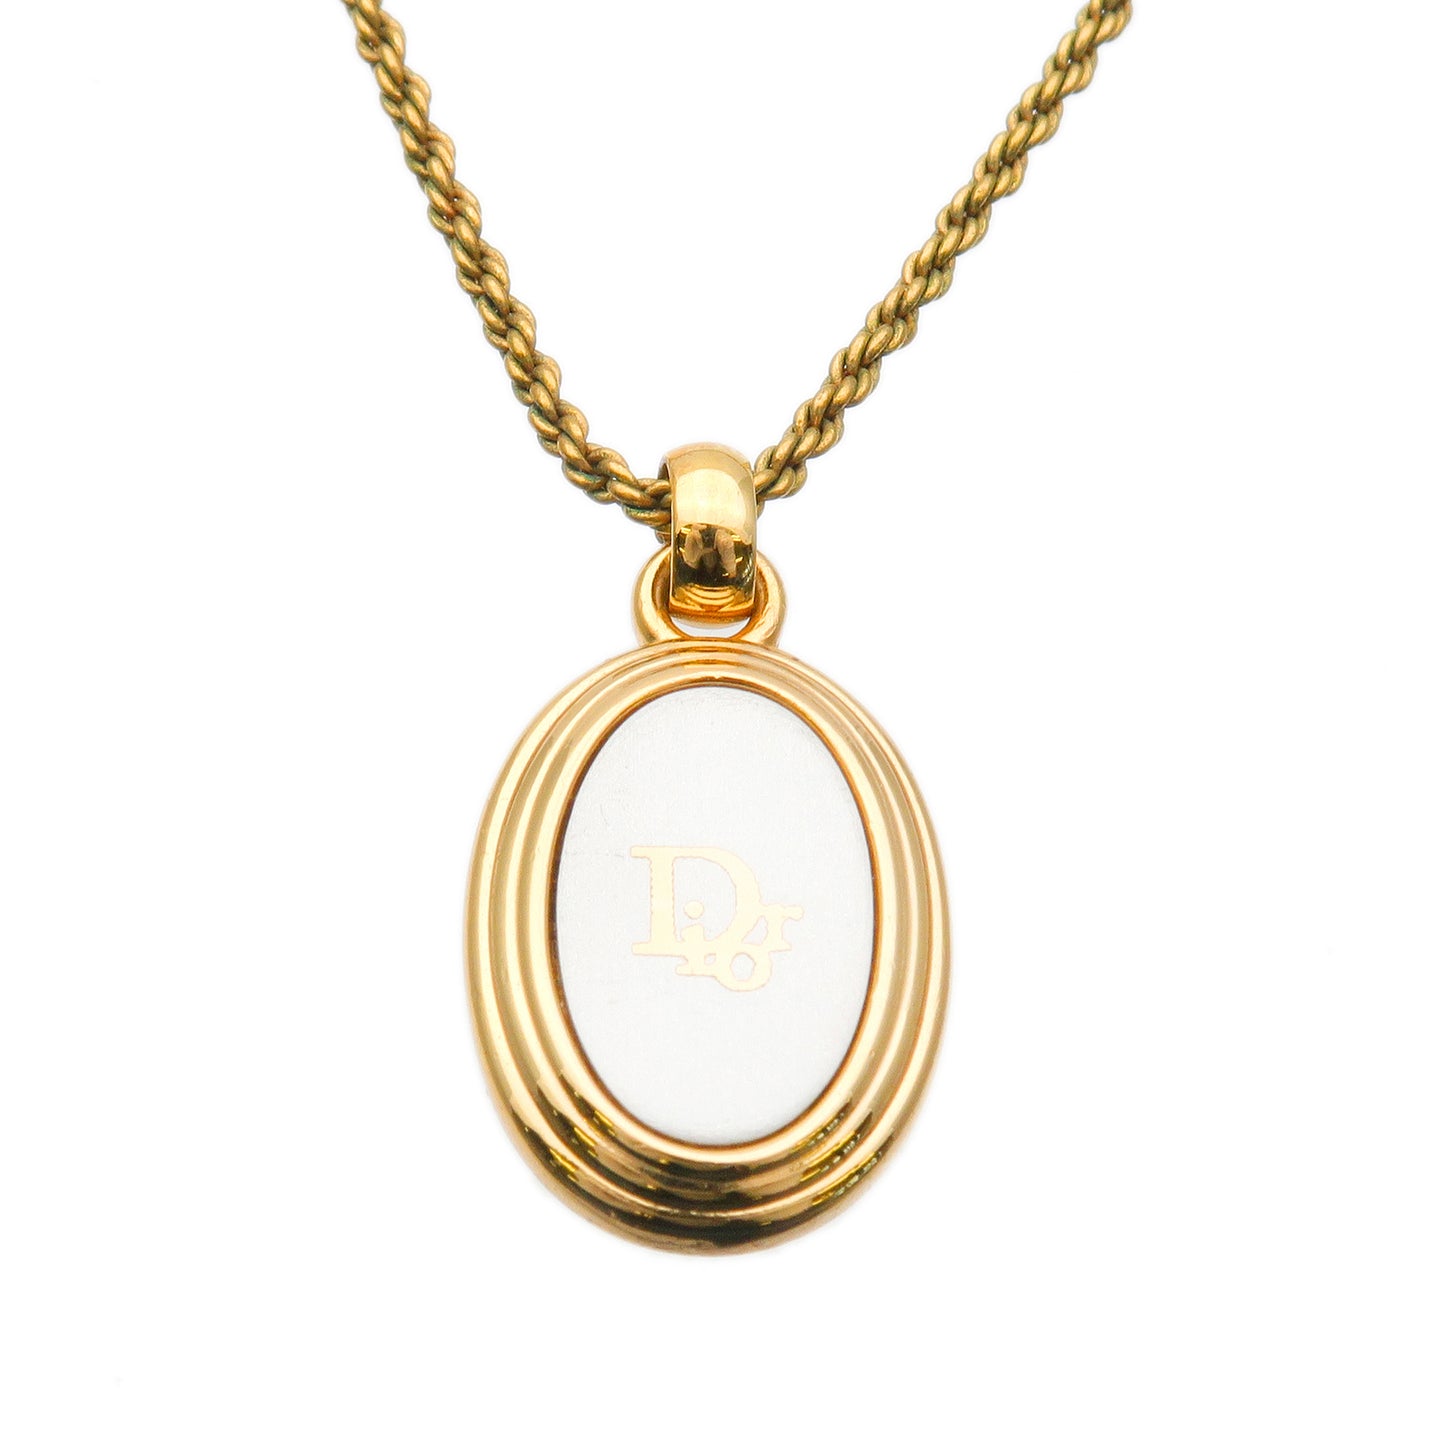 Christian Dior Logo Oval Necklace Pendant Gold White